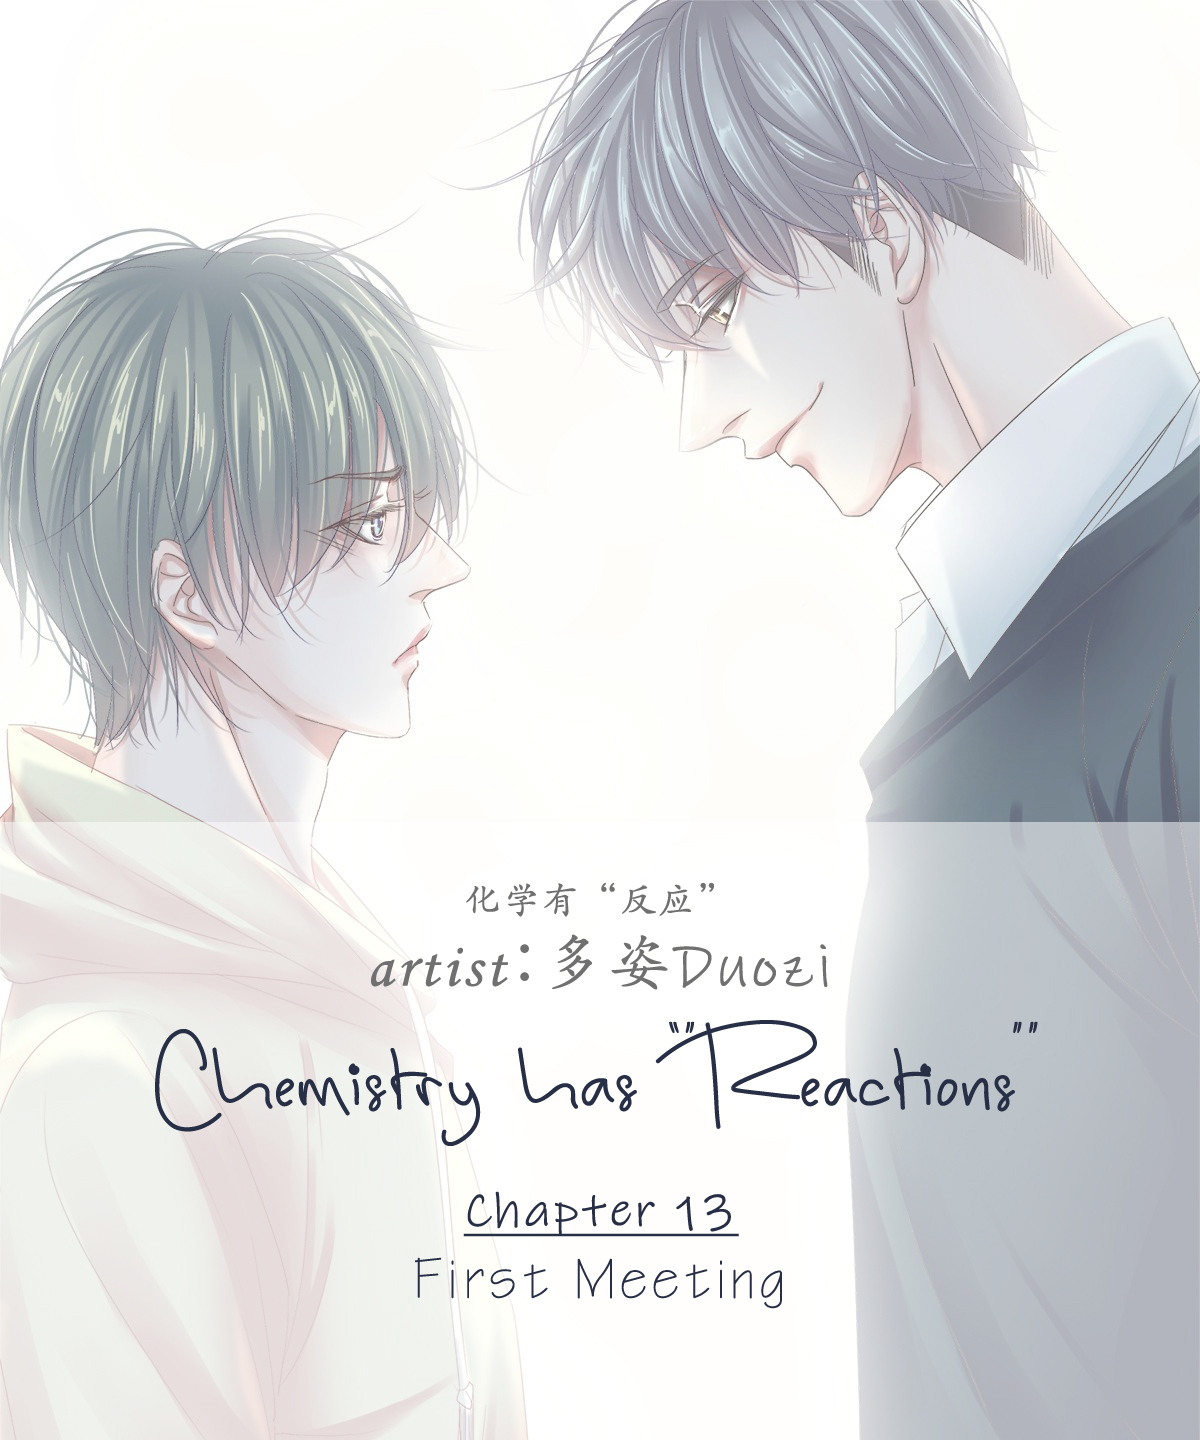 Chemistry has "Reactions" Vol. 1 Ch. 13